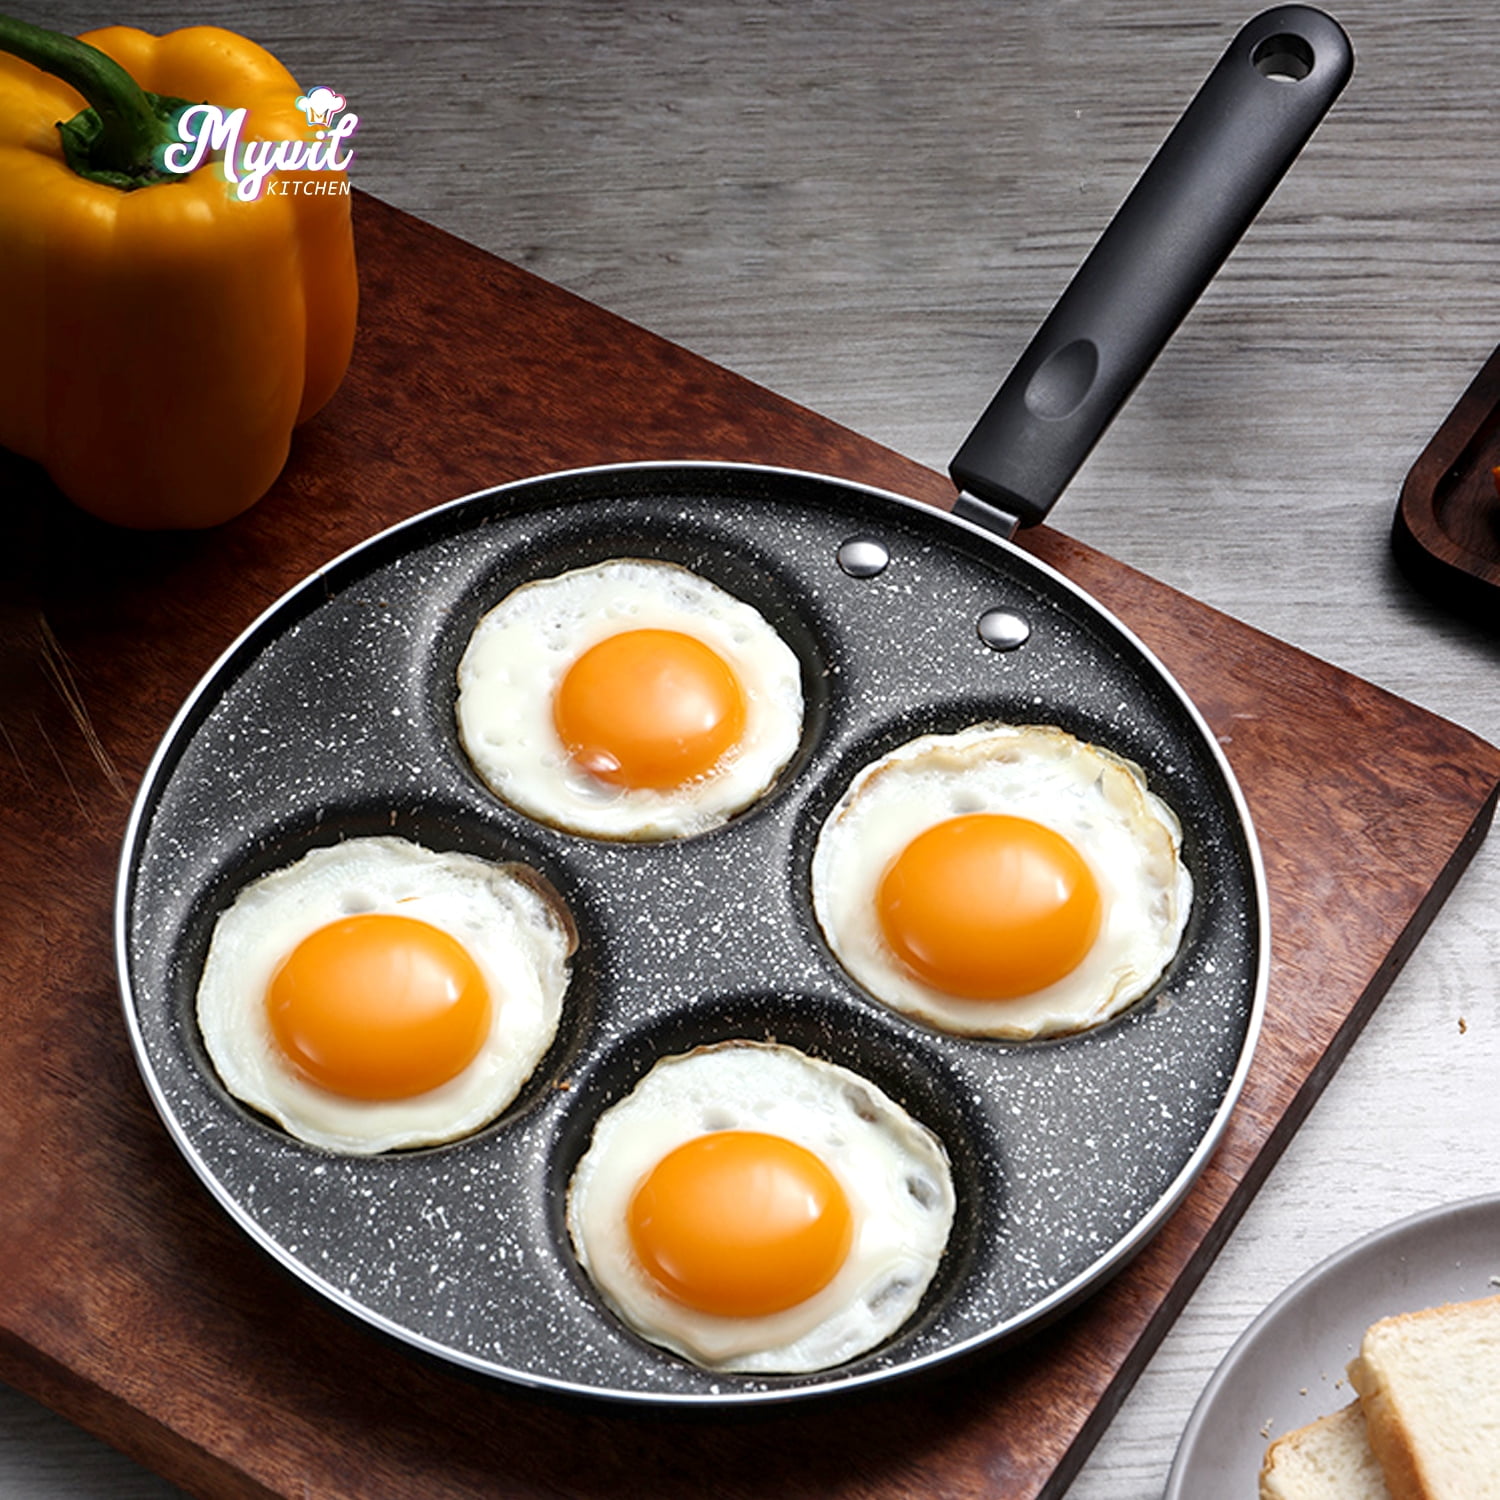 Haofy 7 Holes Frying Pan Non Stick Fried Eggs Cooking Pan Burger Mold  Household Kitchen Cookware,Cooking Pan,Kitchen Cookware